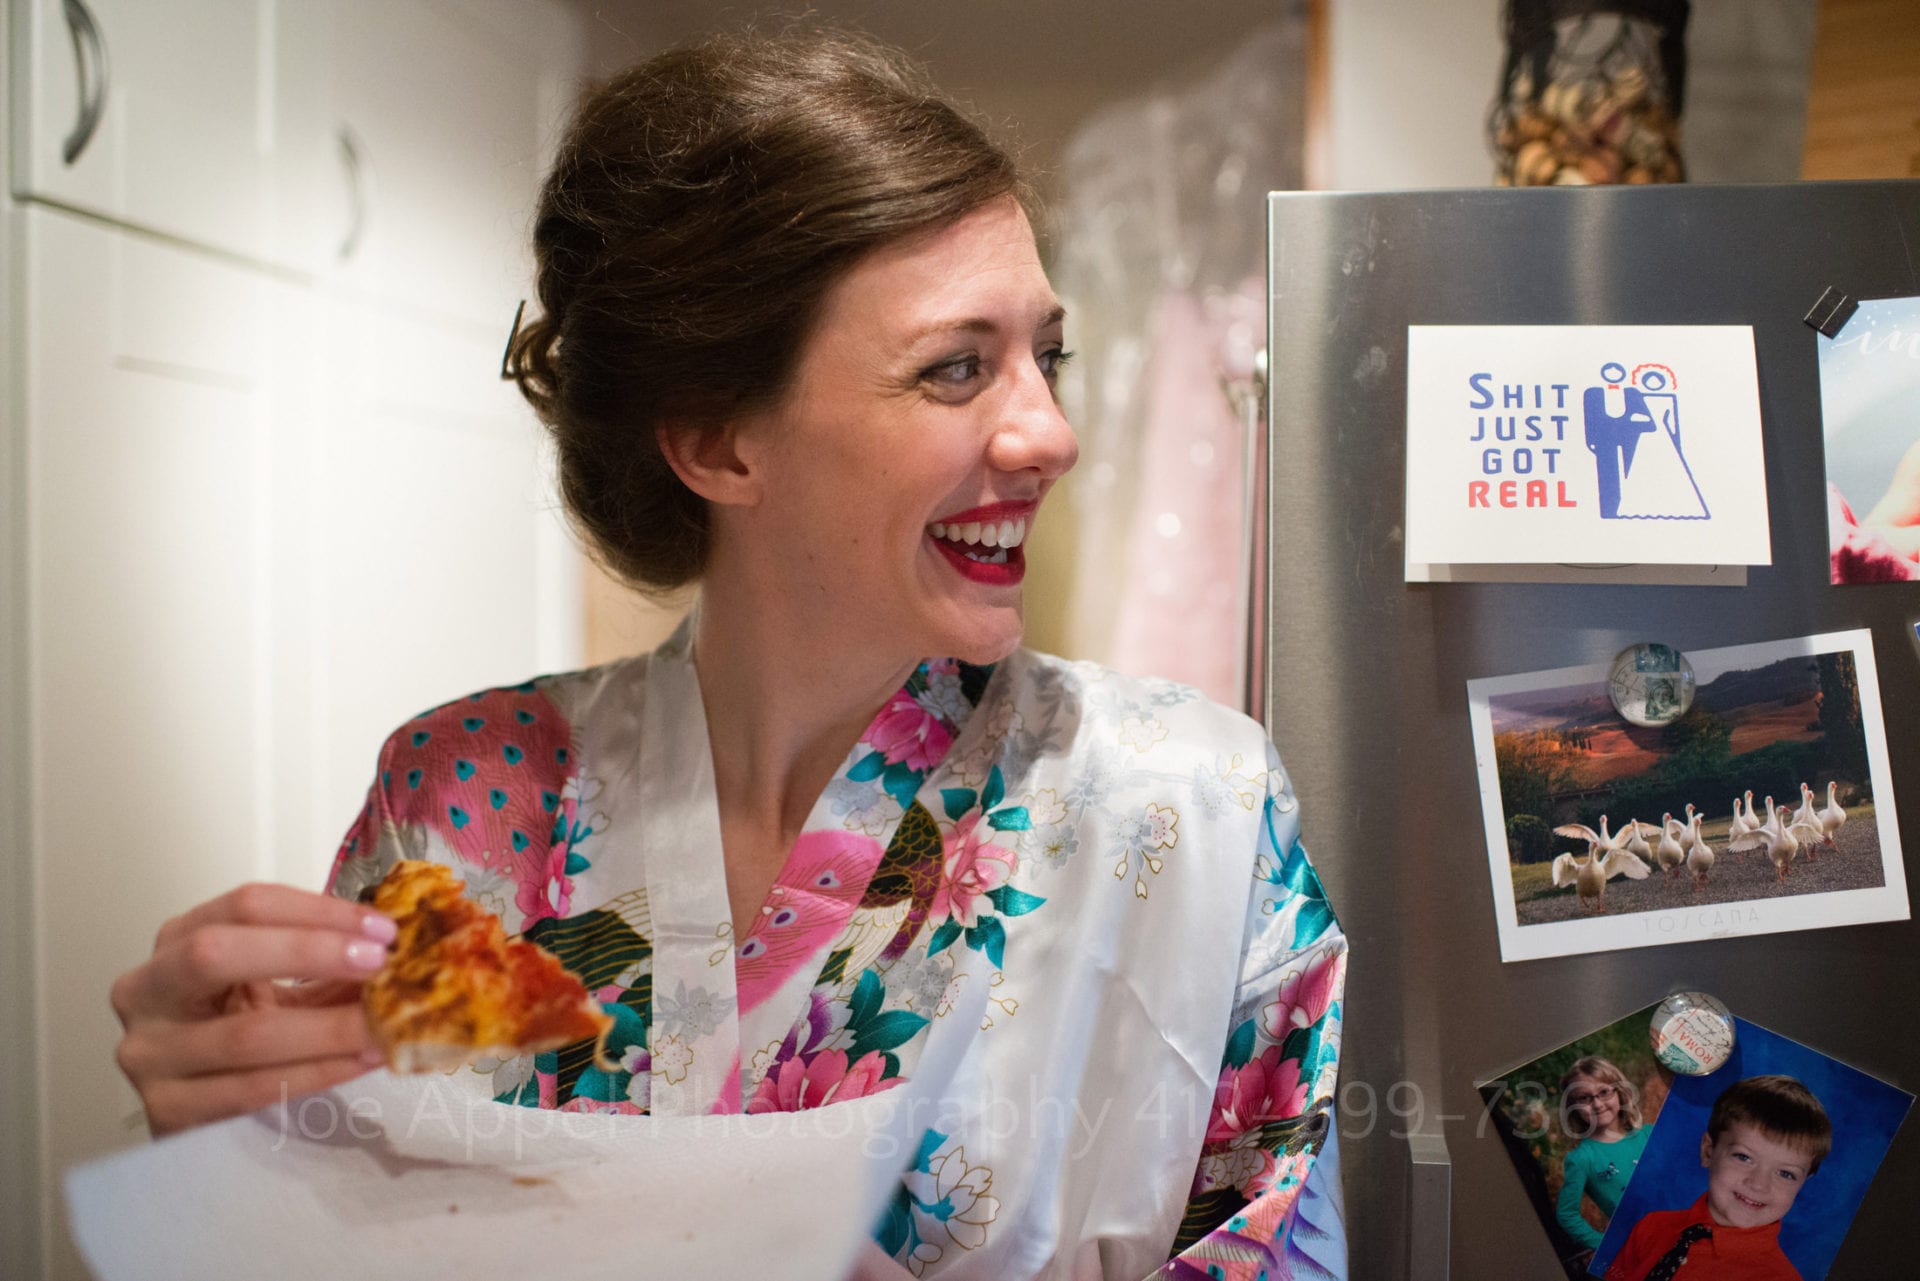 A bride wearing a floral dressing gown laughs as she eats a piece of pizza before her wedding. She's looking at a card that says "Shit just got real"